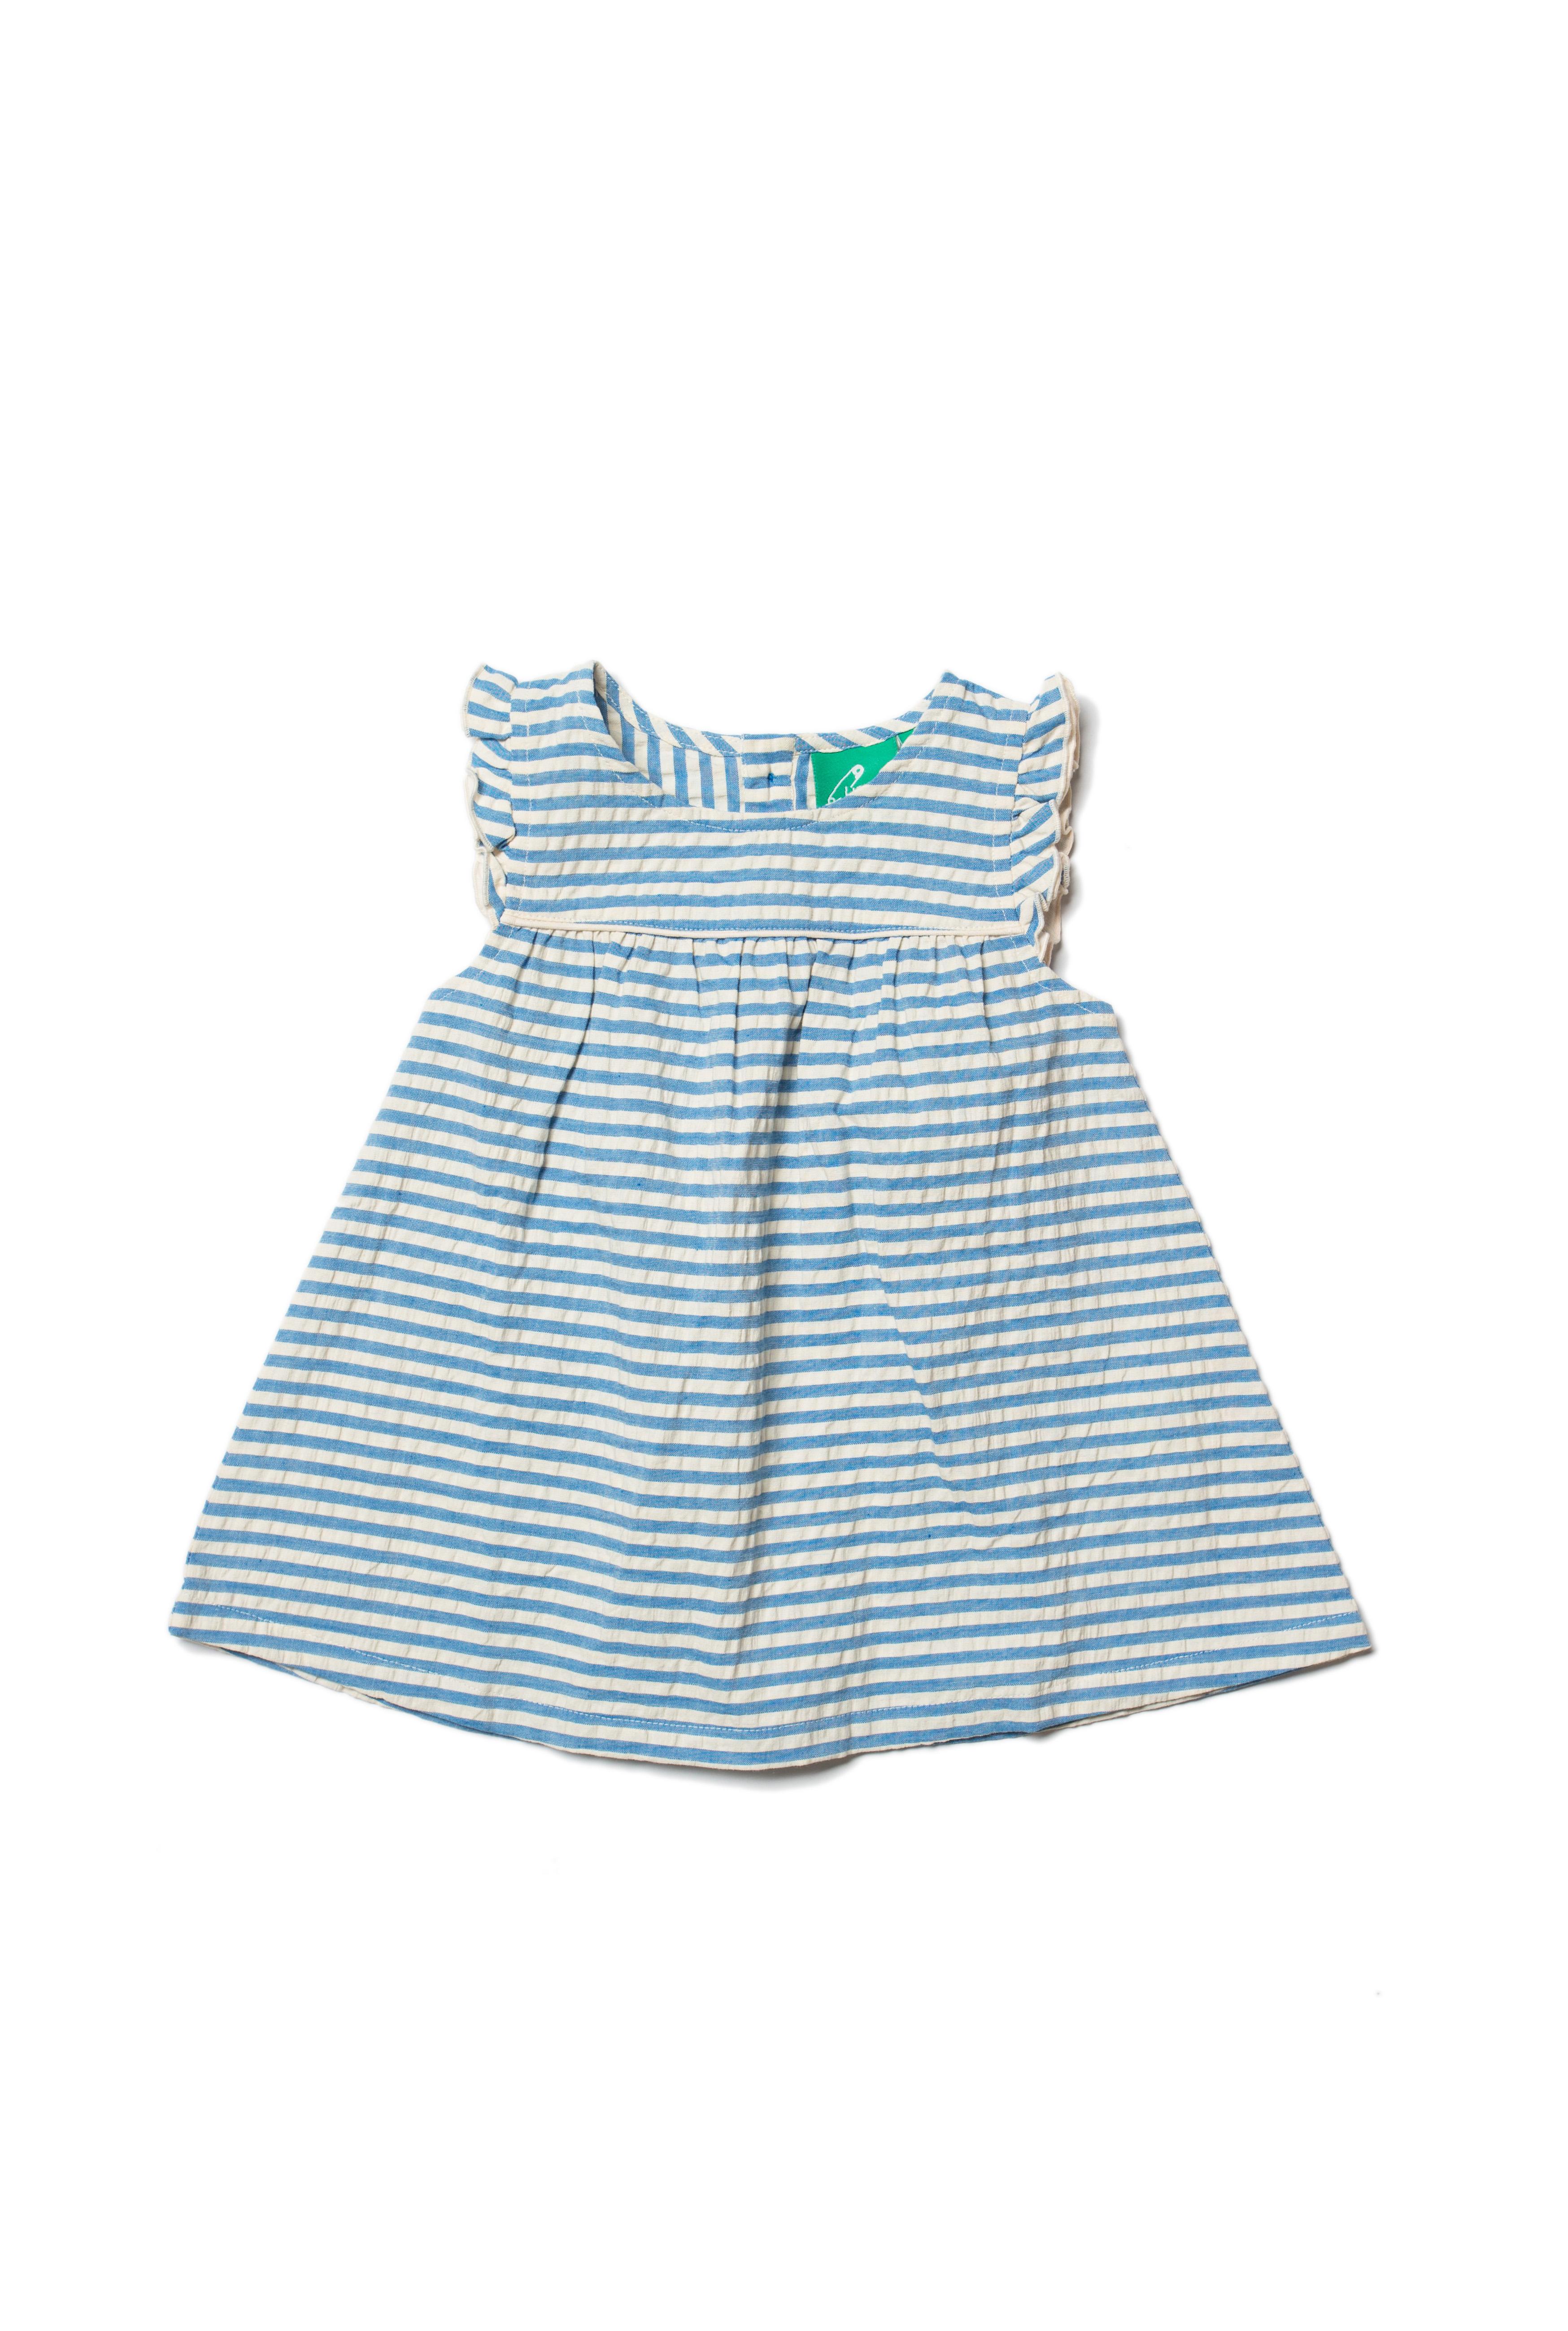 Product image of blue and white stripe summer dress in seersucker cotton